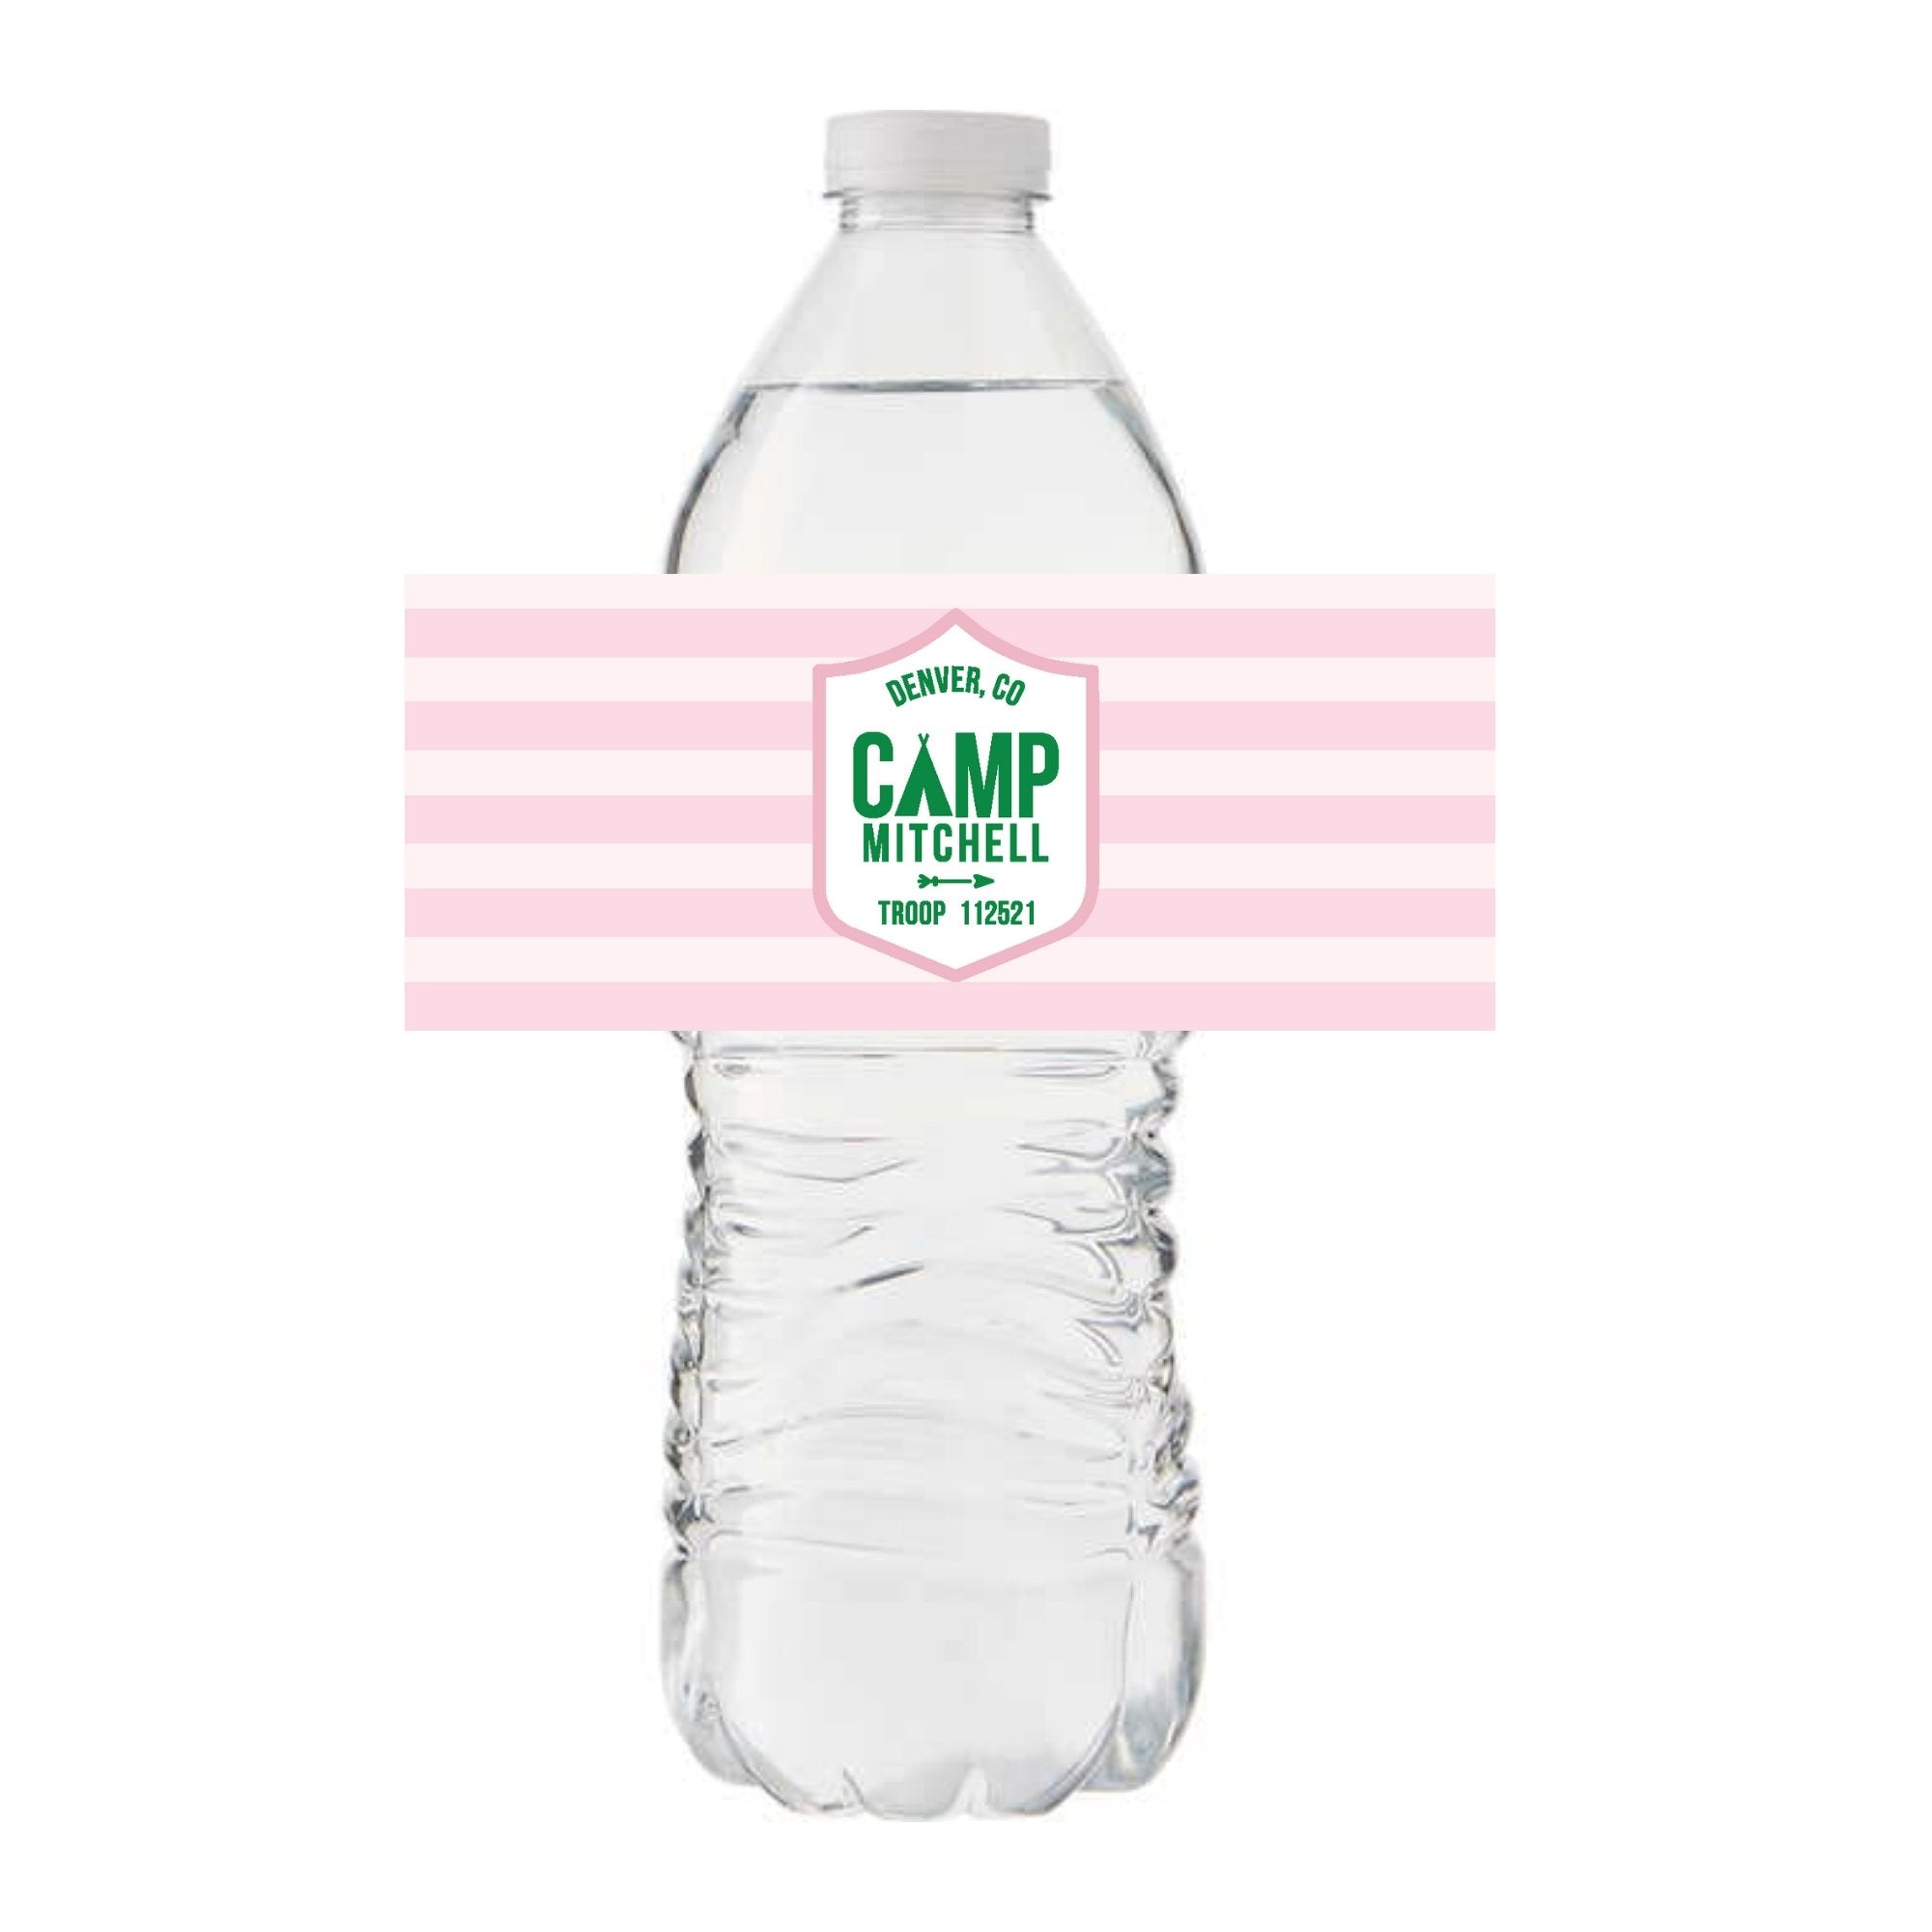 A water bottle is customized with a pink camp label